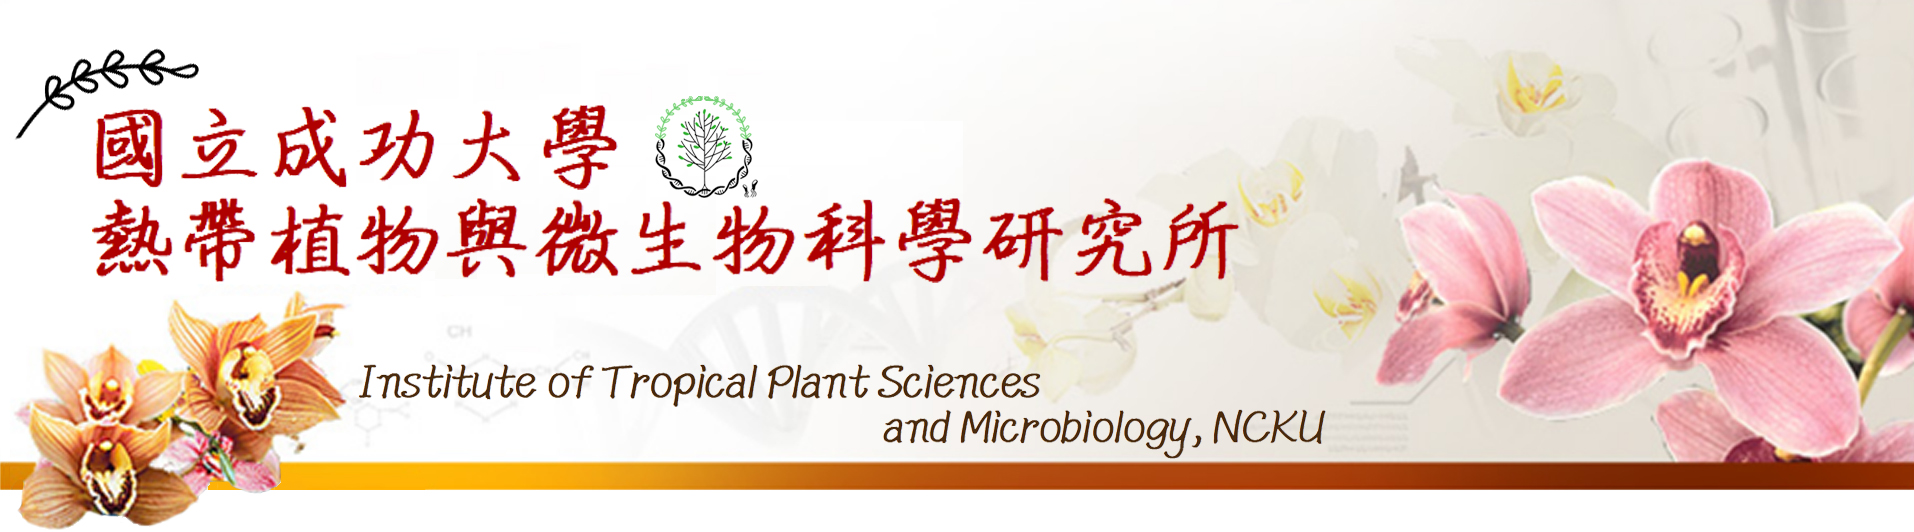 Institute of Tropical Plant Sciences and Microbiology, NCKU